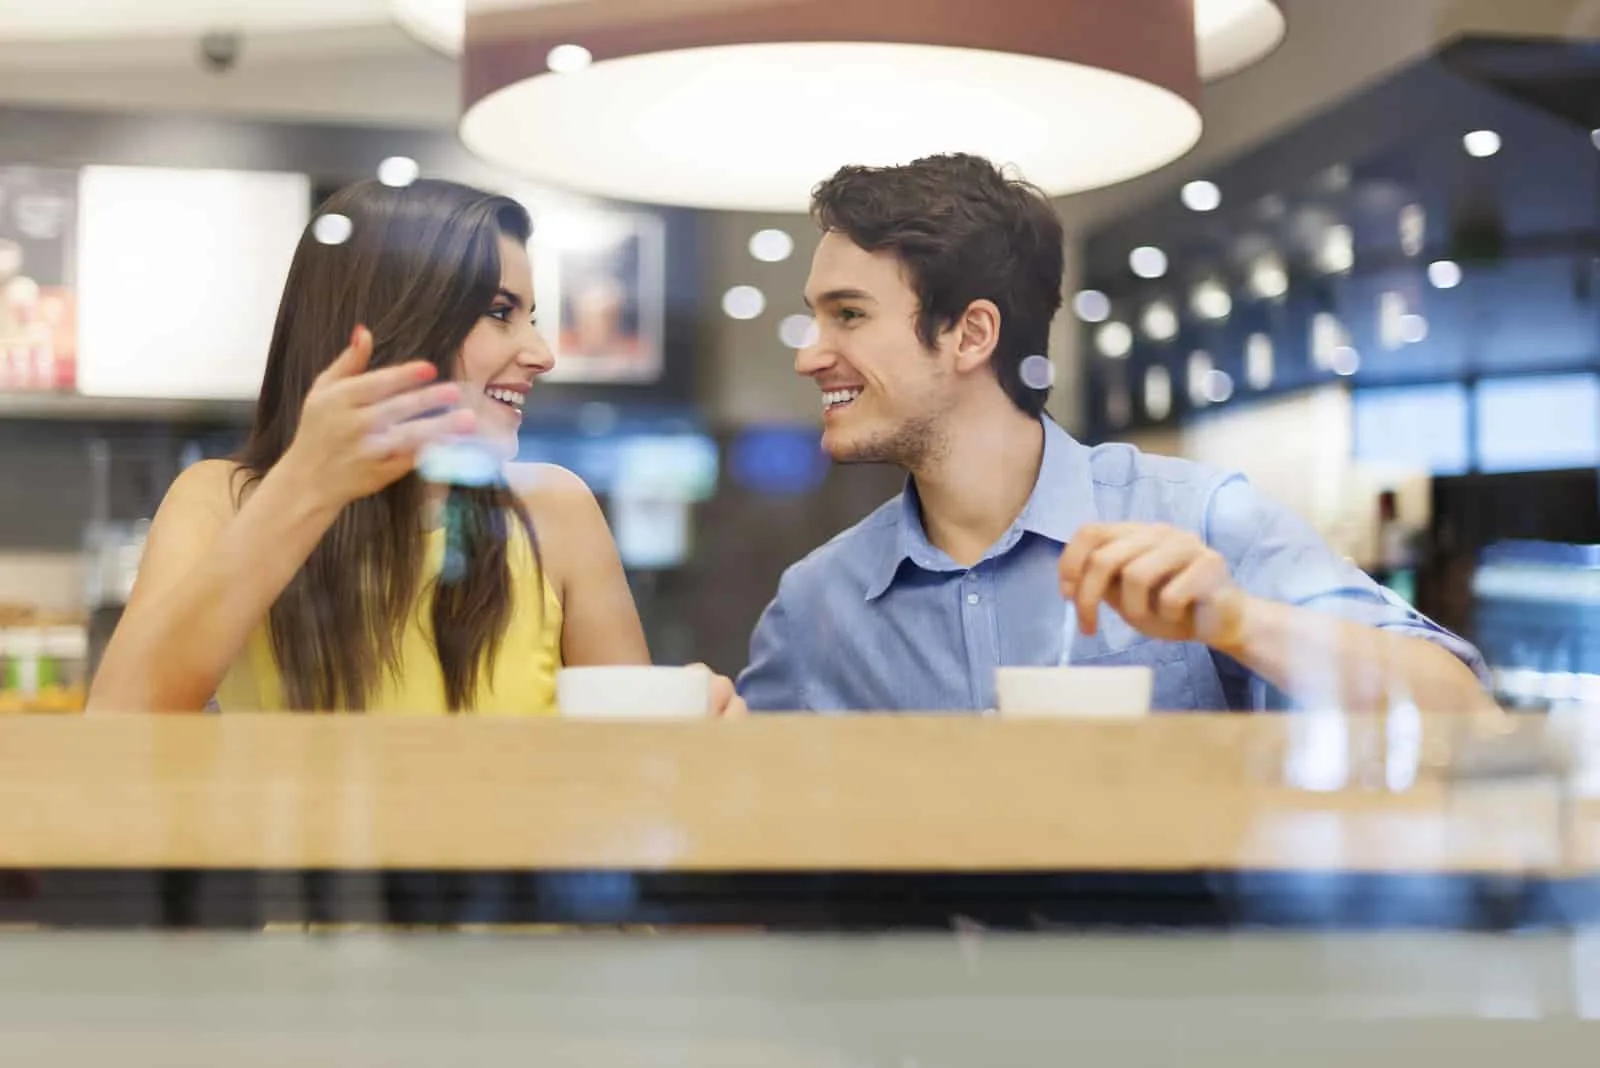 a smiling man and woman sit in a cafe and talk